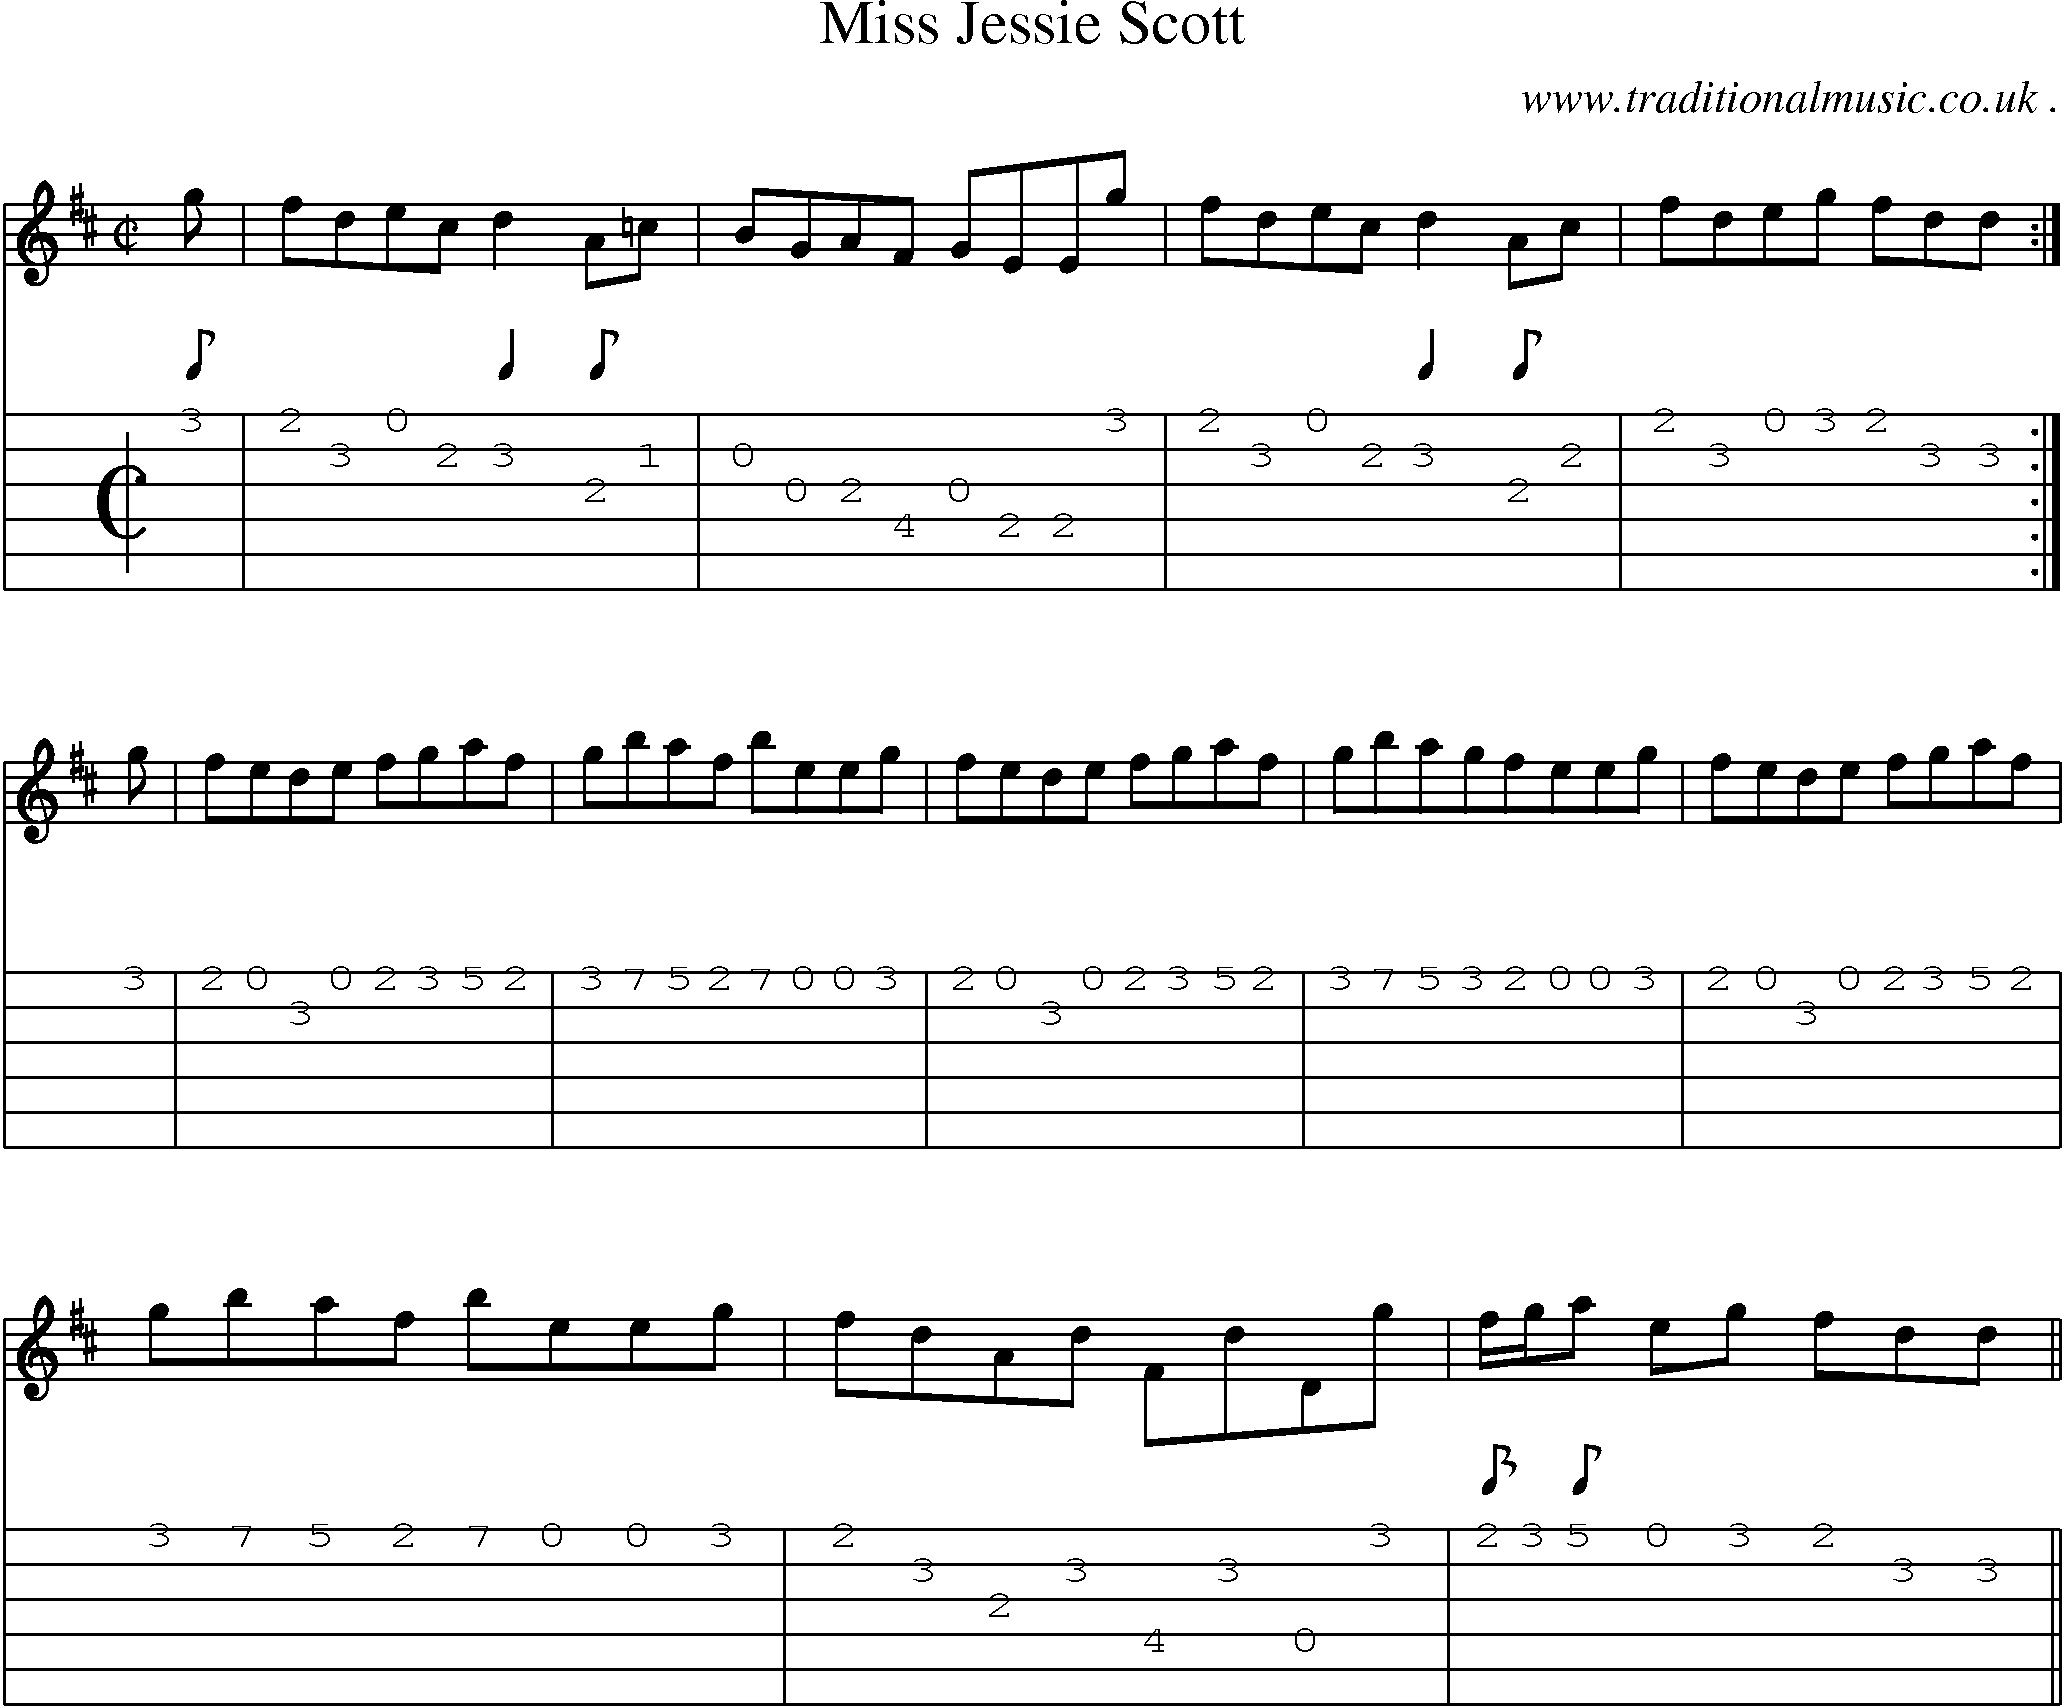 Sheet-music  score, Chords and Guitar Tabs for Miss Jessie Scott